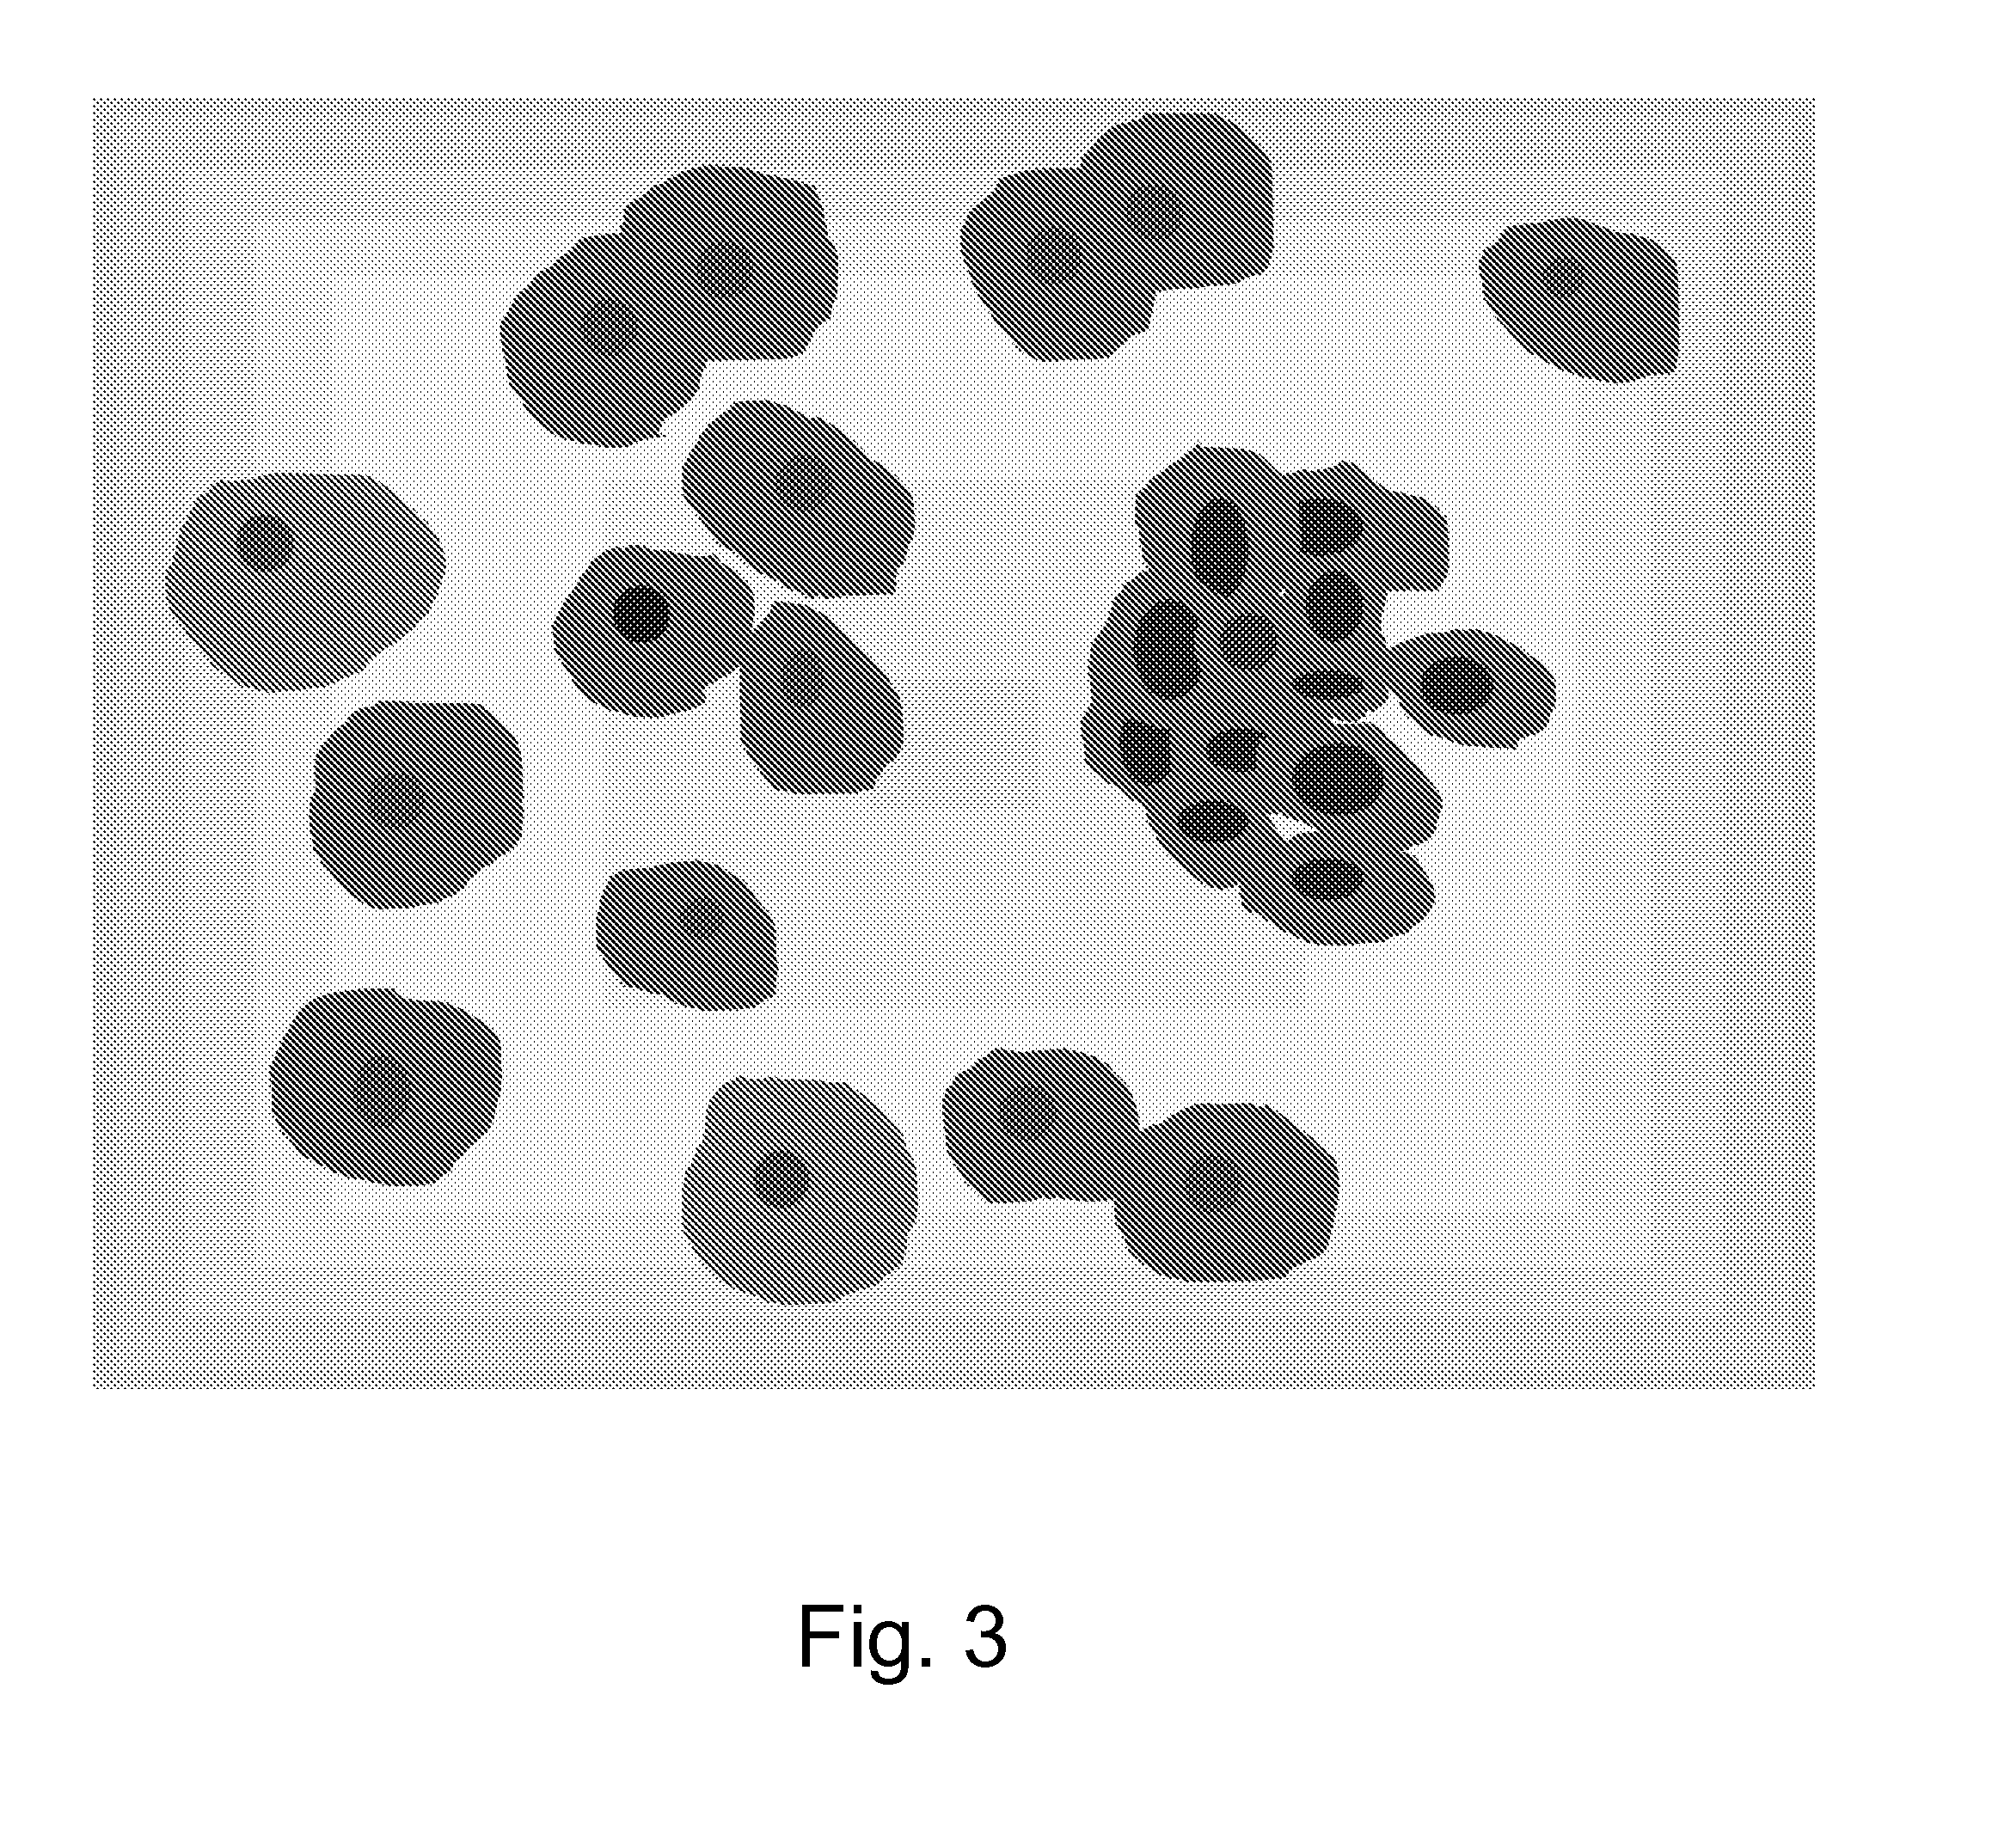 System and method for the detection of abnormalities in a biological sample